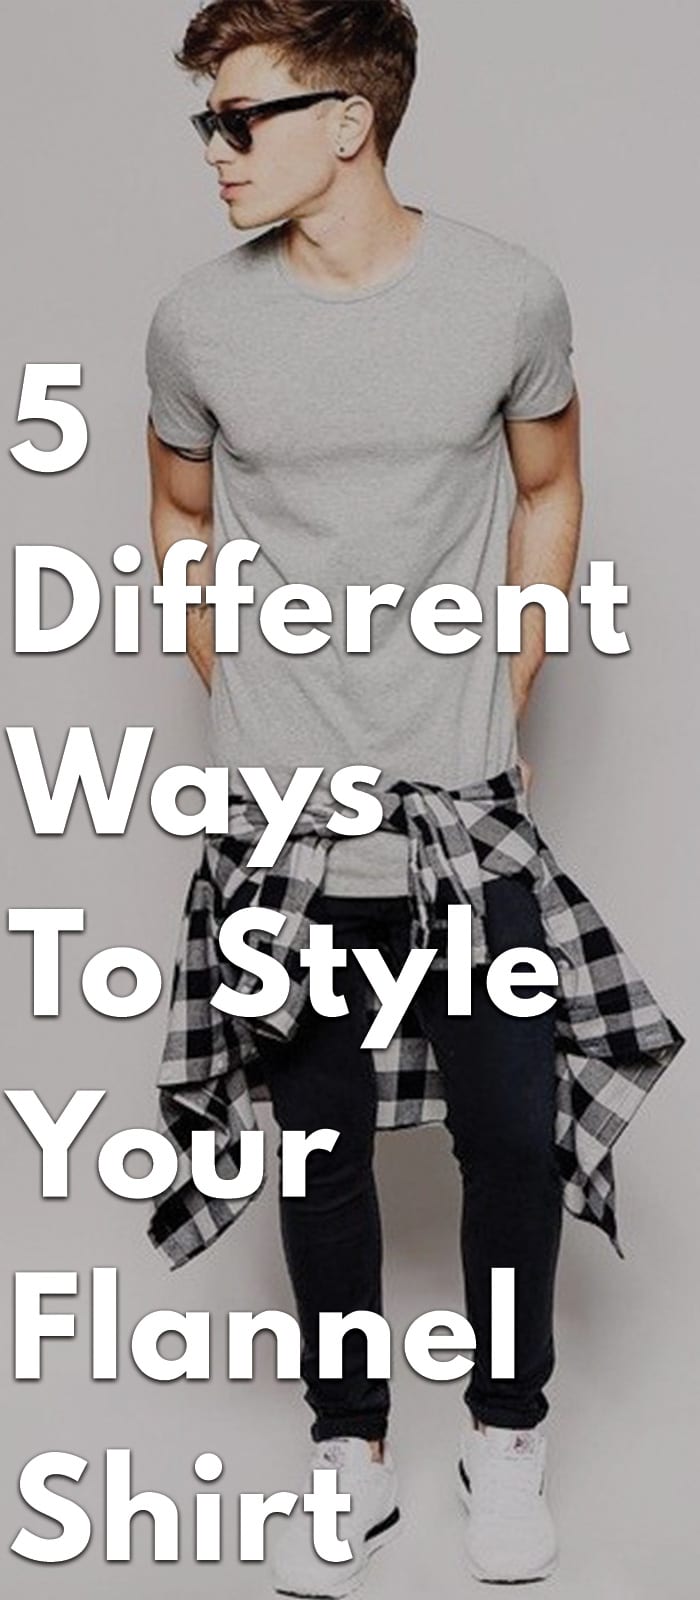 5-Ways-to-Style-Your-Flannel-Shirt.